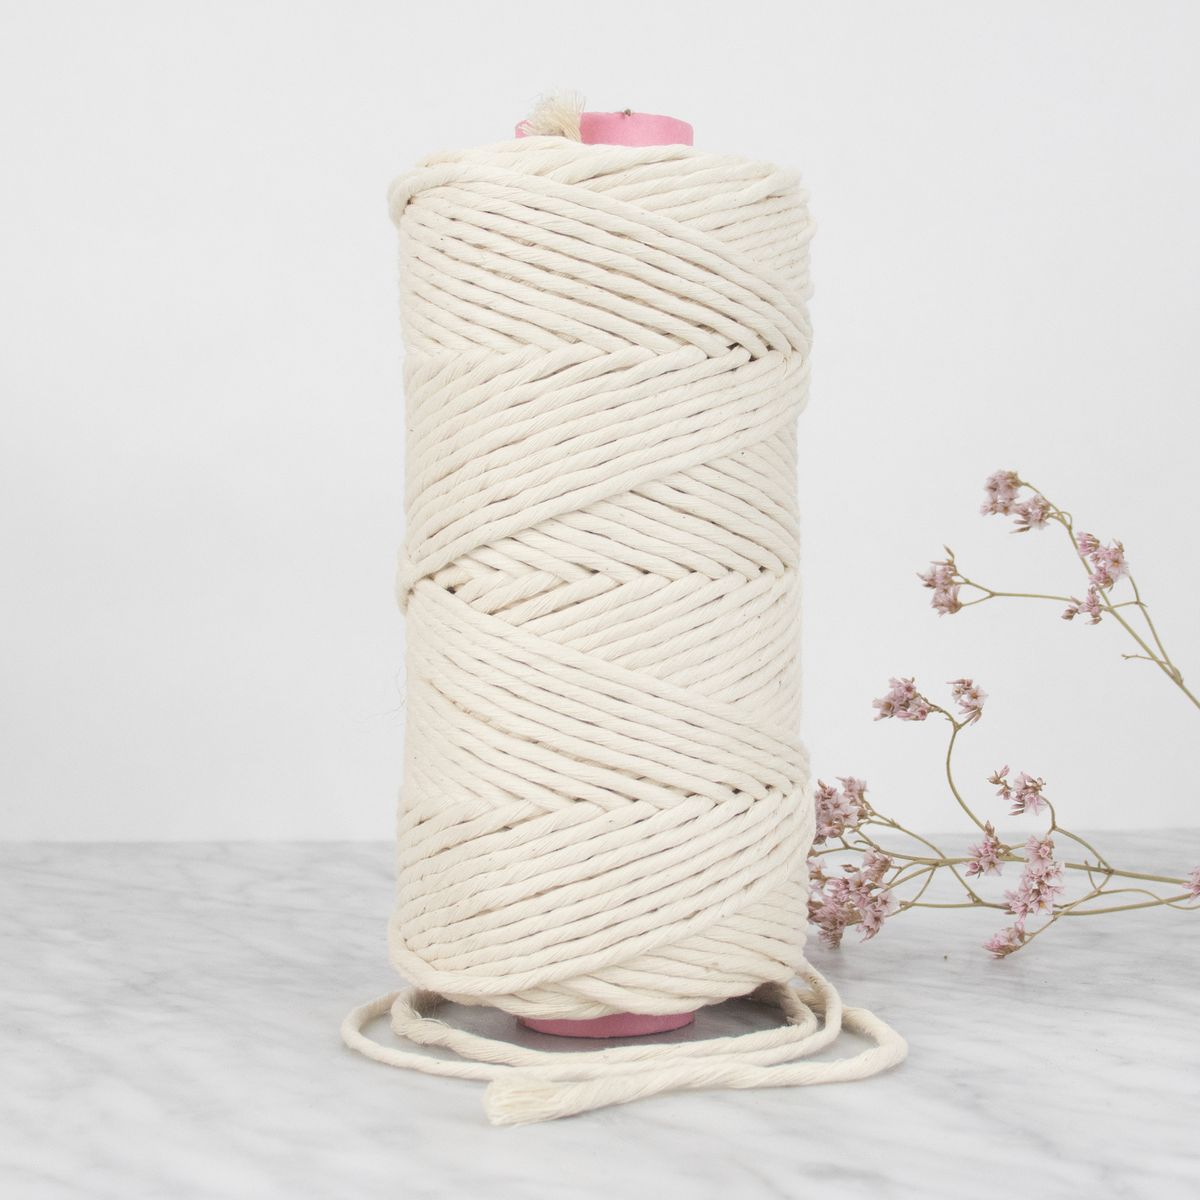 5mm Recycled Cotton String - Natural - 500 grams